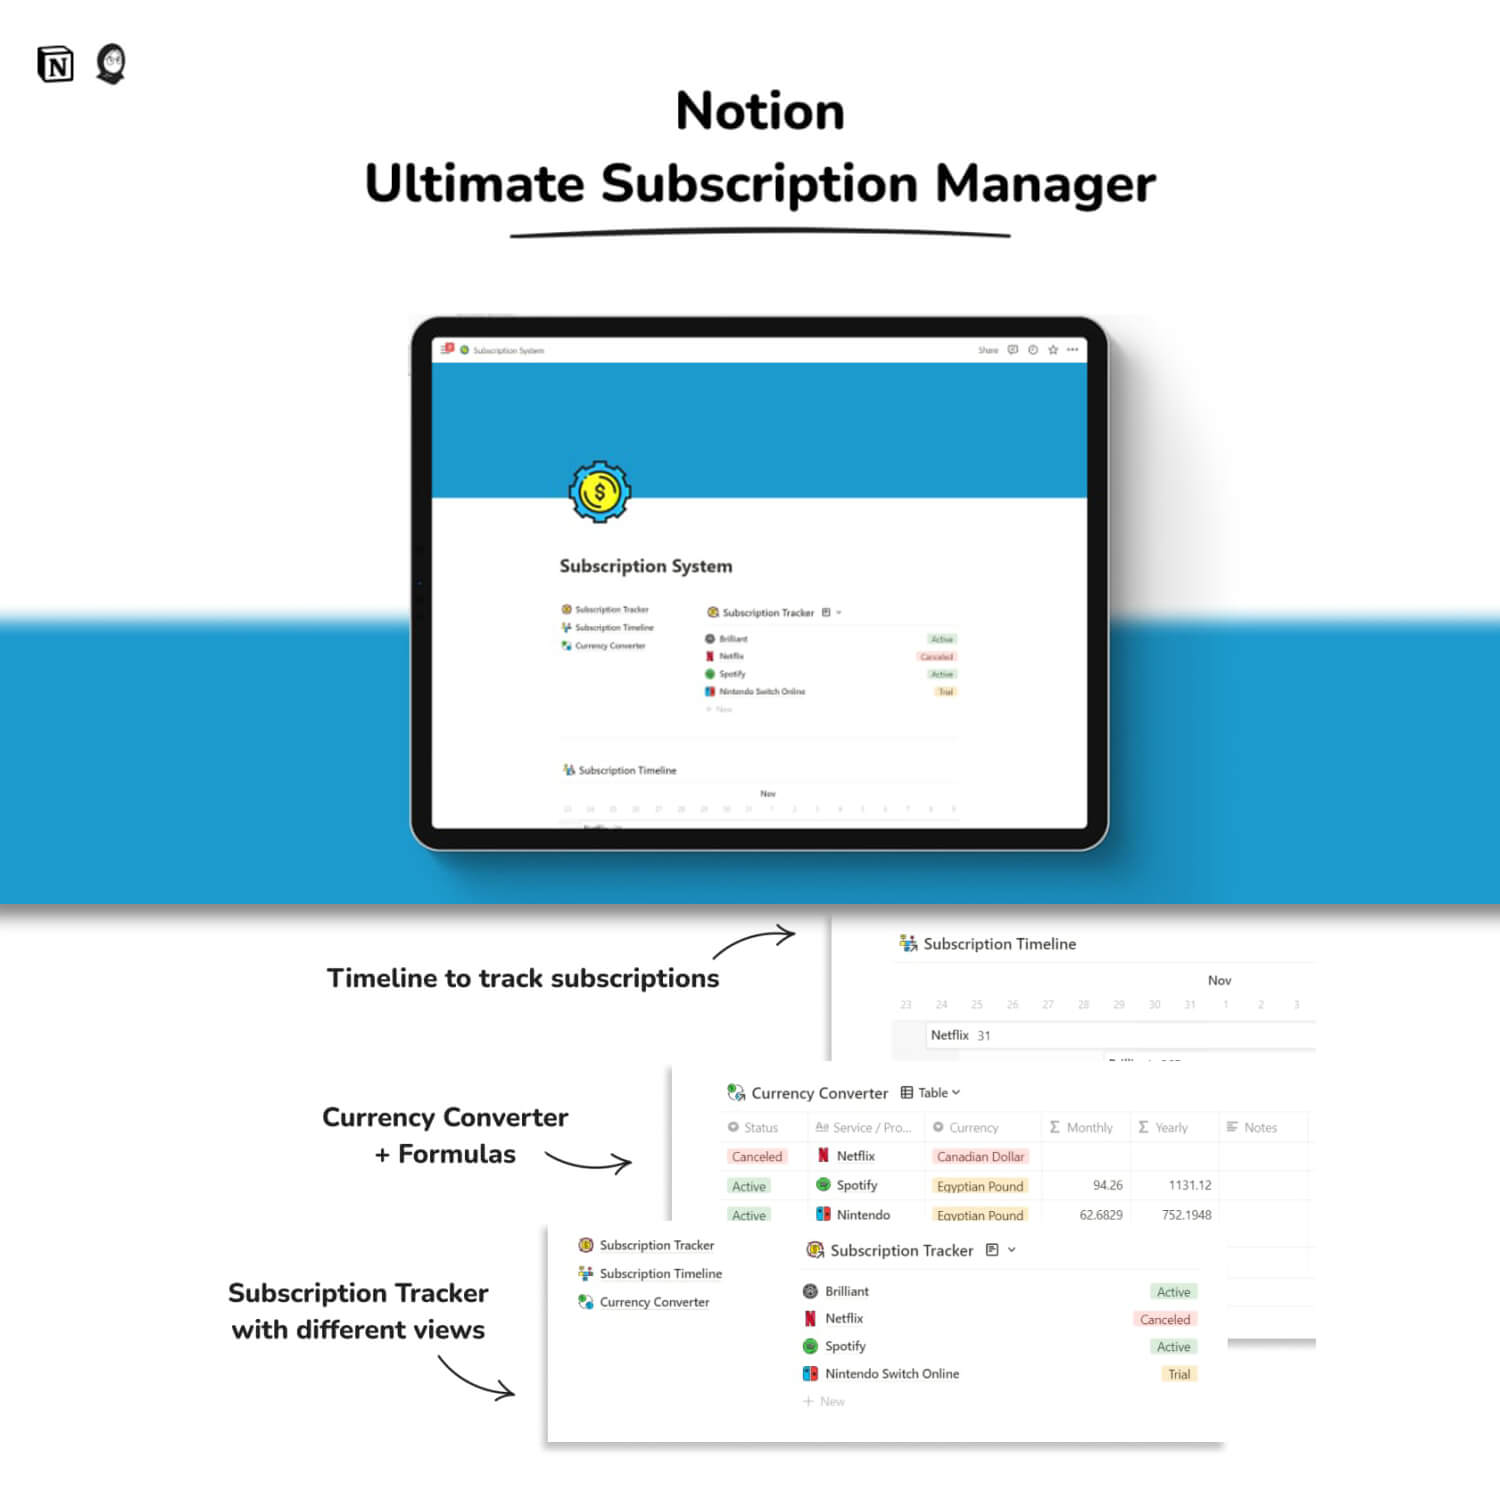 Description of the different fields and sections with the maximum subscription of the manager.